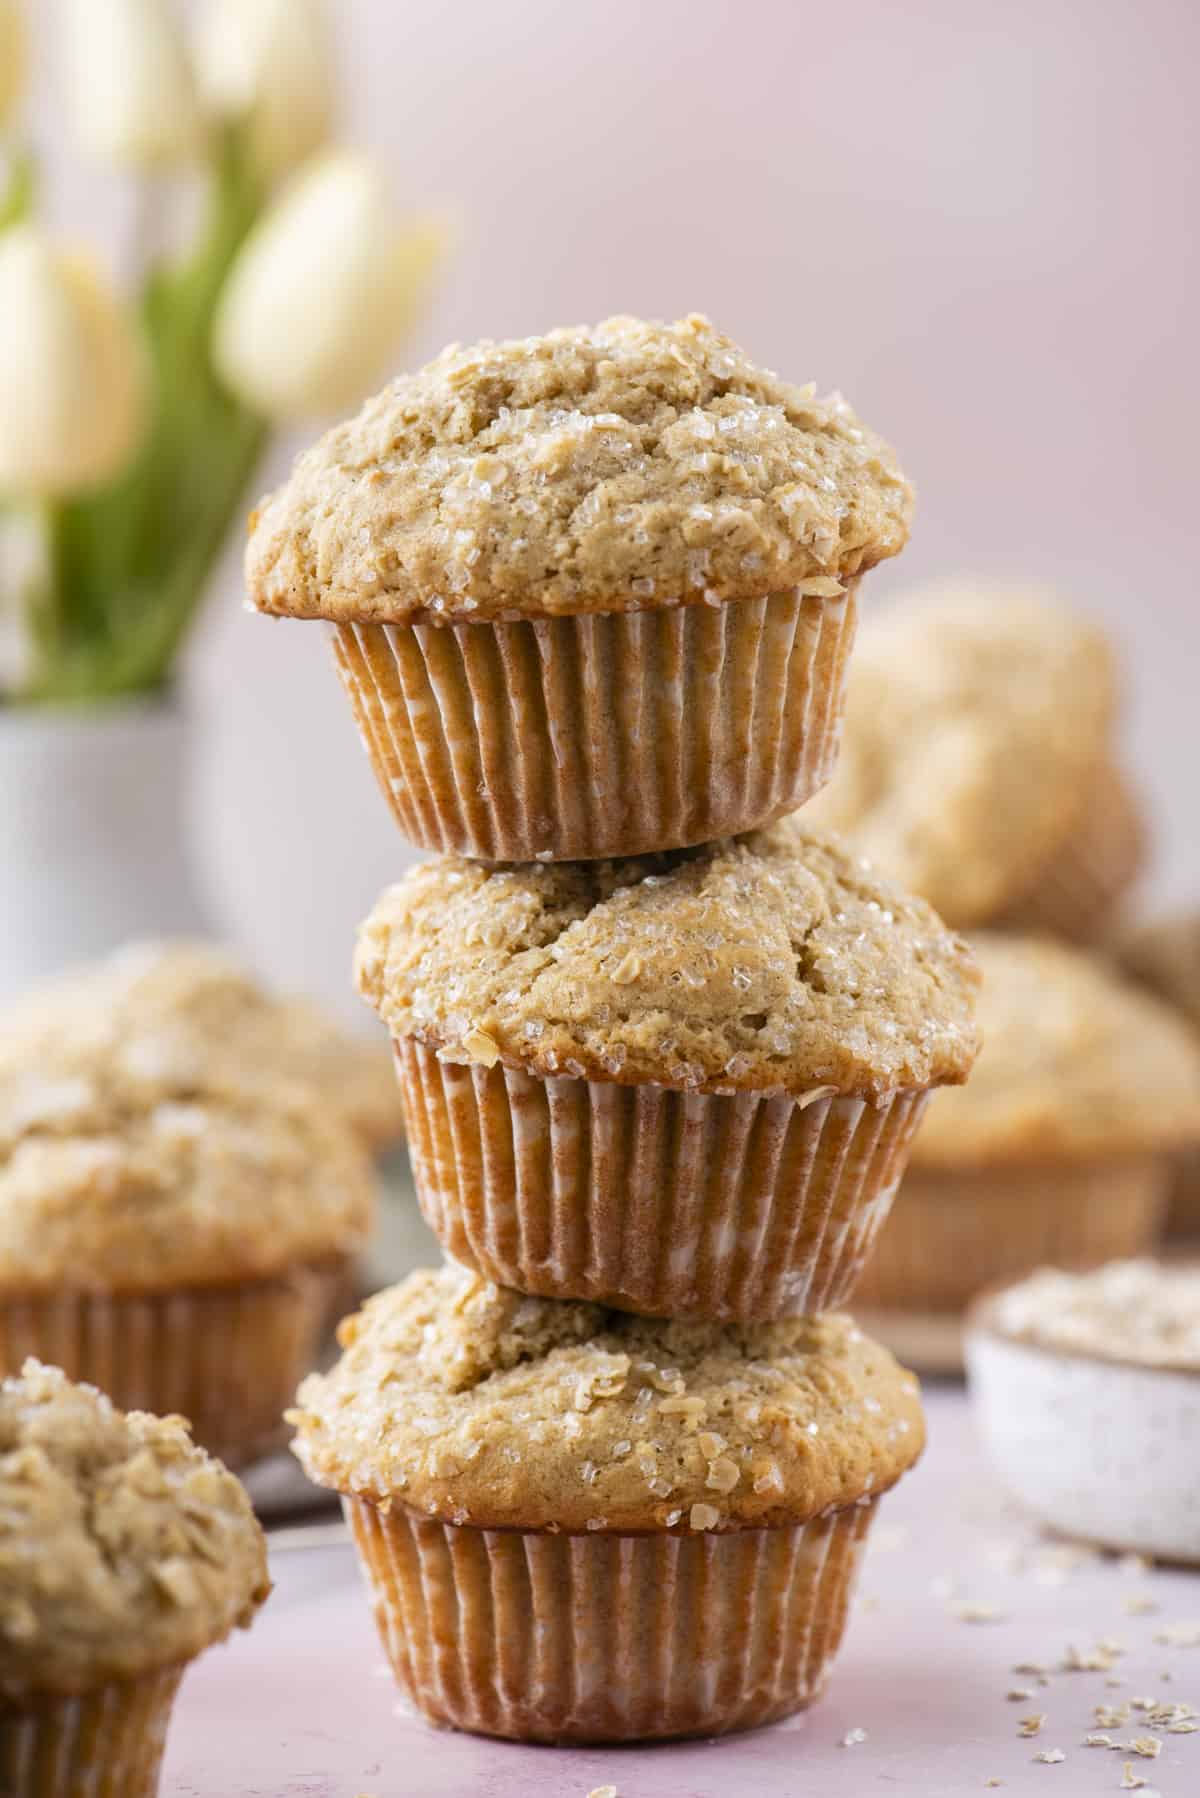 a stack of three oatmeal muffins on a light pink surface surrounded by more muffins and oats sprinkled around